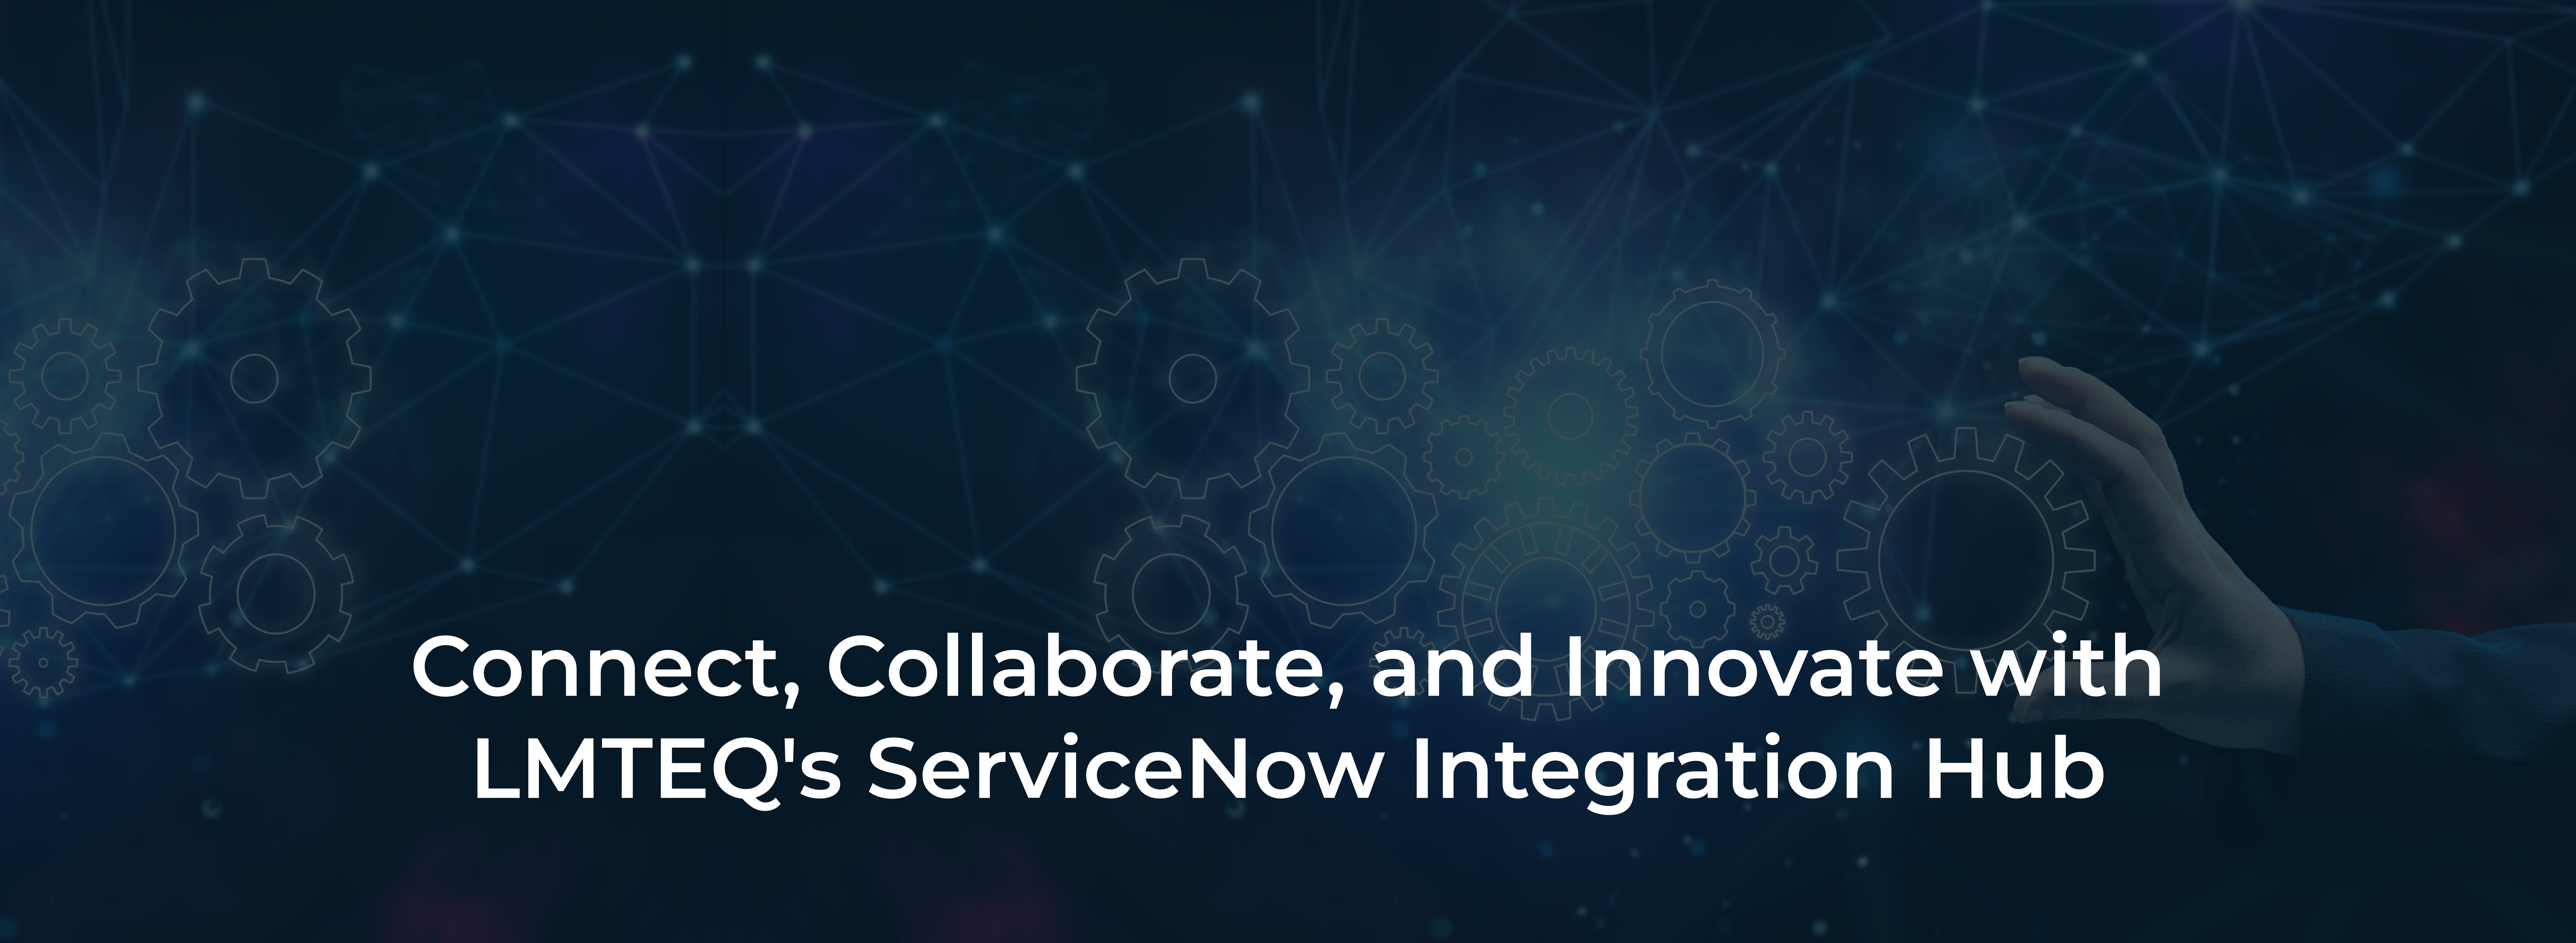 Connect, Collaborate, and Innovate with LMTEQ's ServiceNow Integration Hub